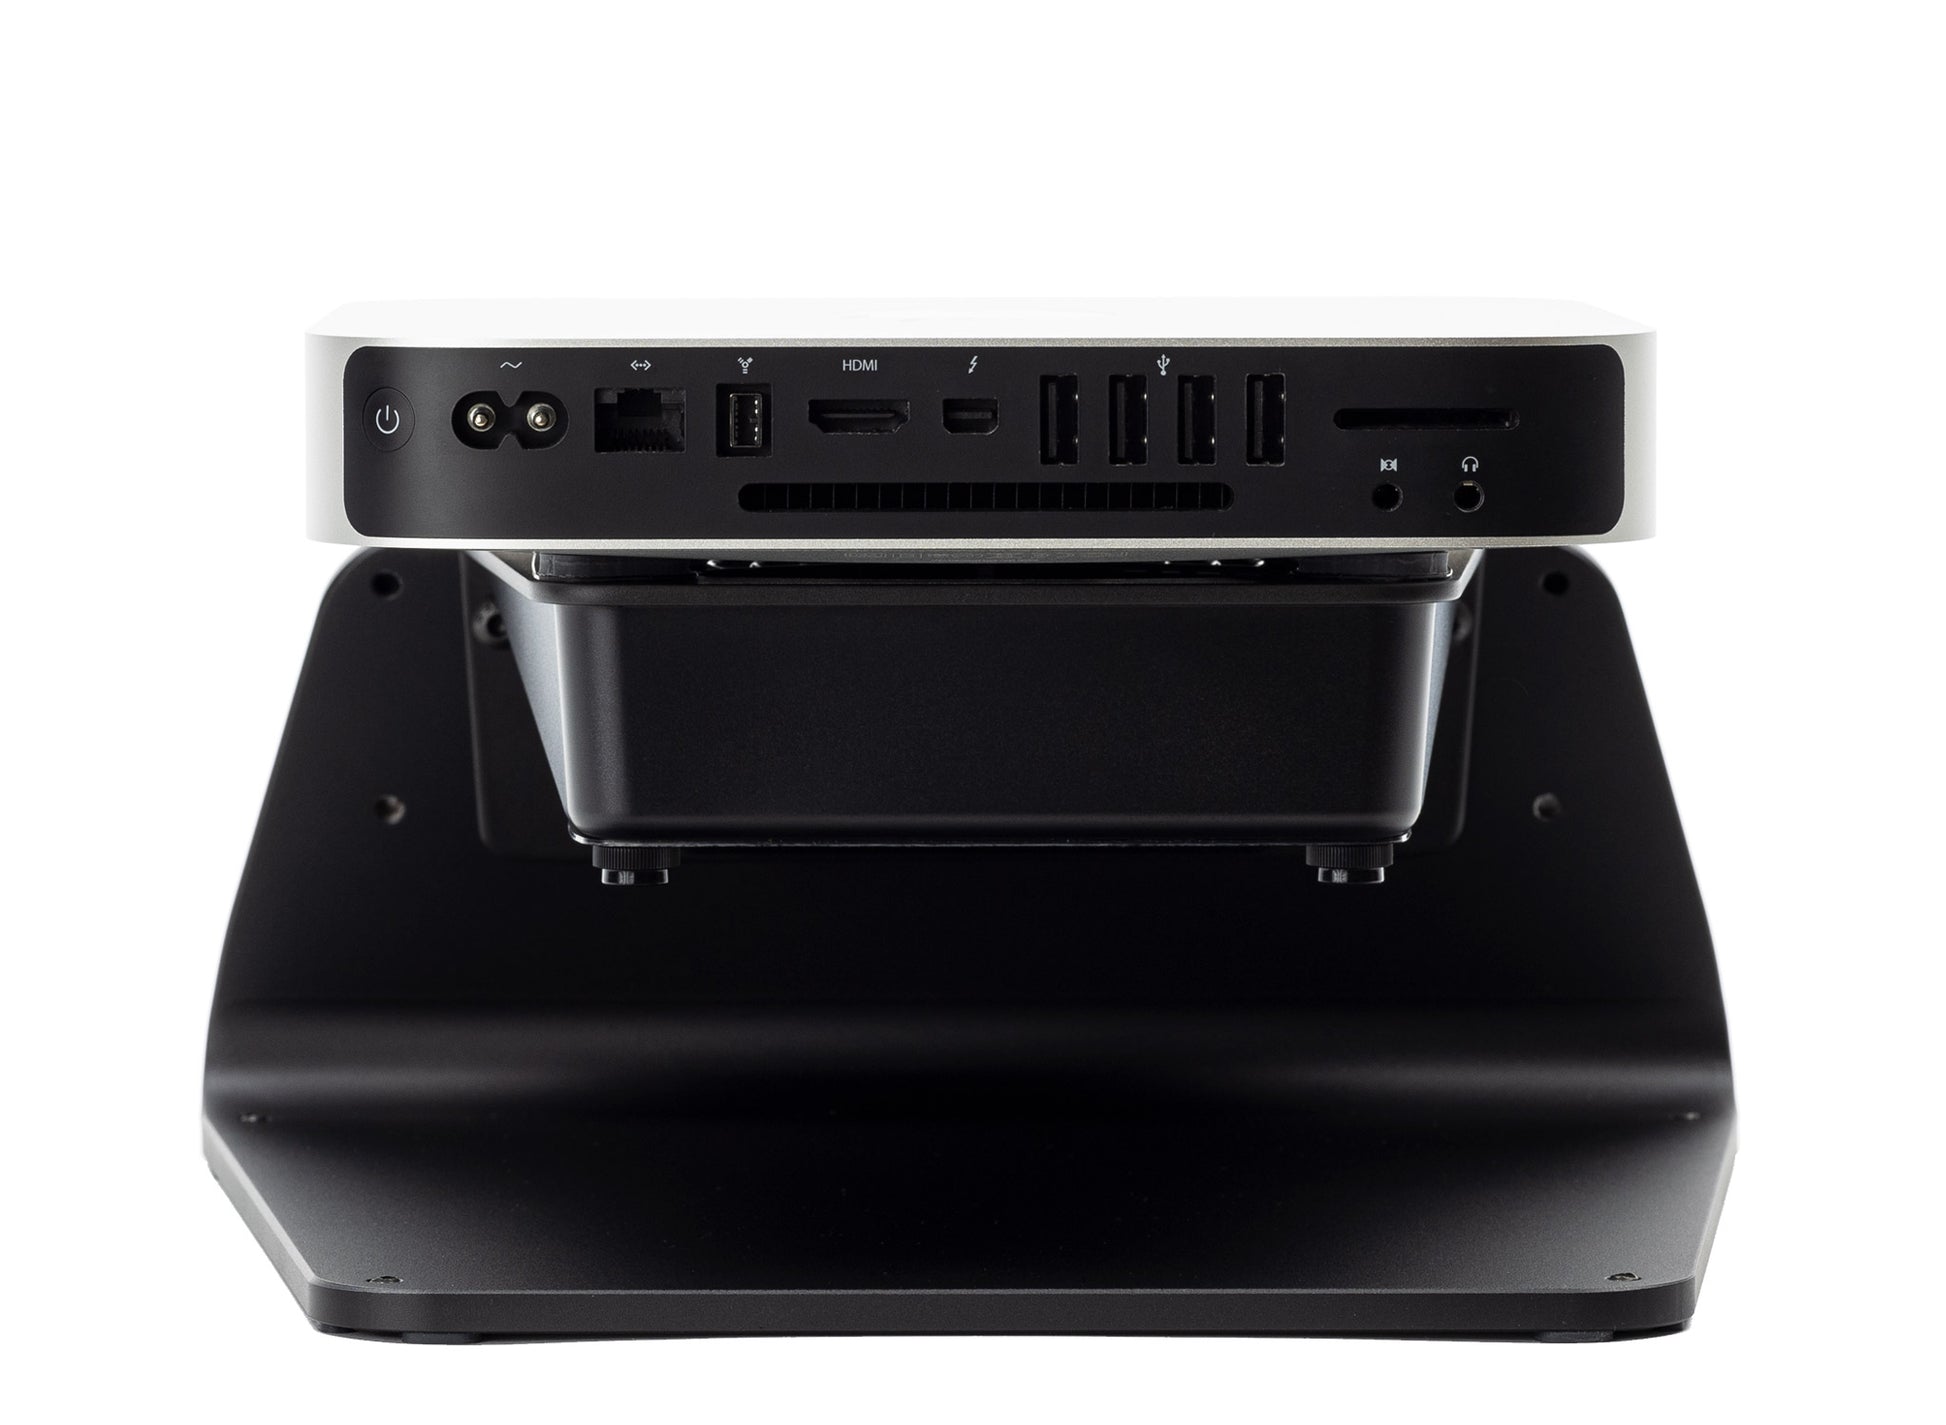 SVALT Cooling Stand model SxM black back view for quiet fan cooling performance with Apple Mac Mini